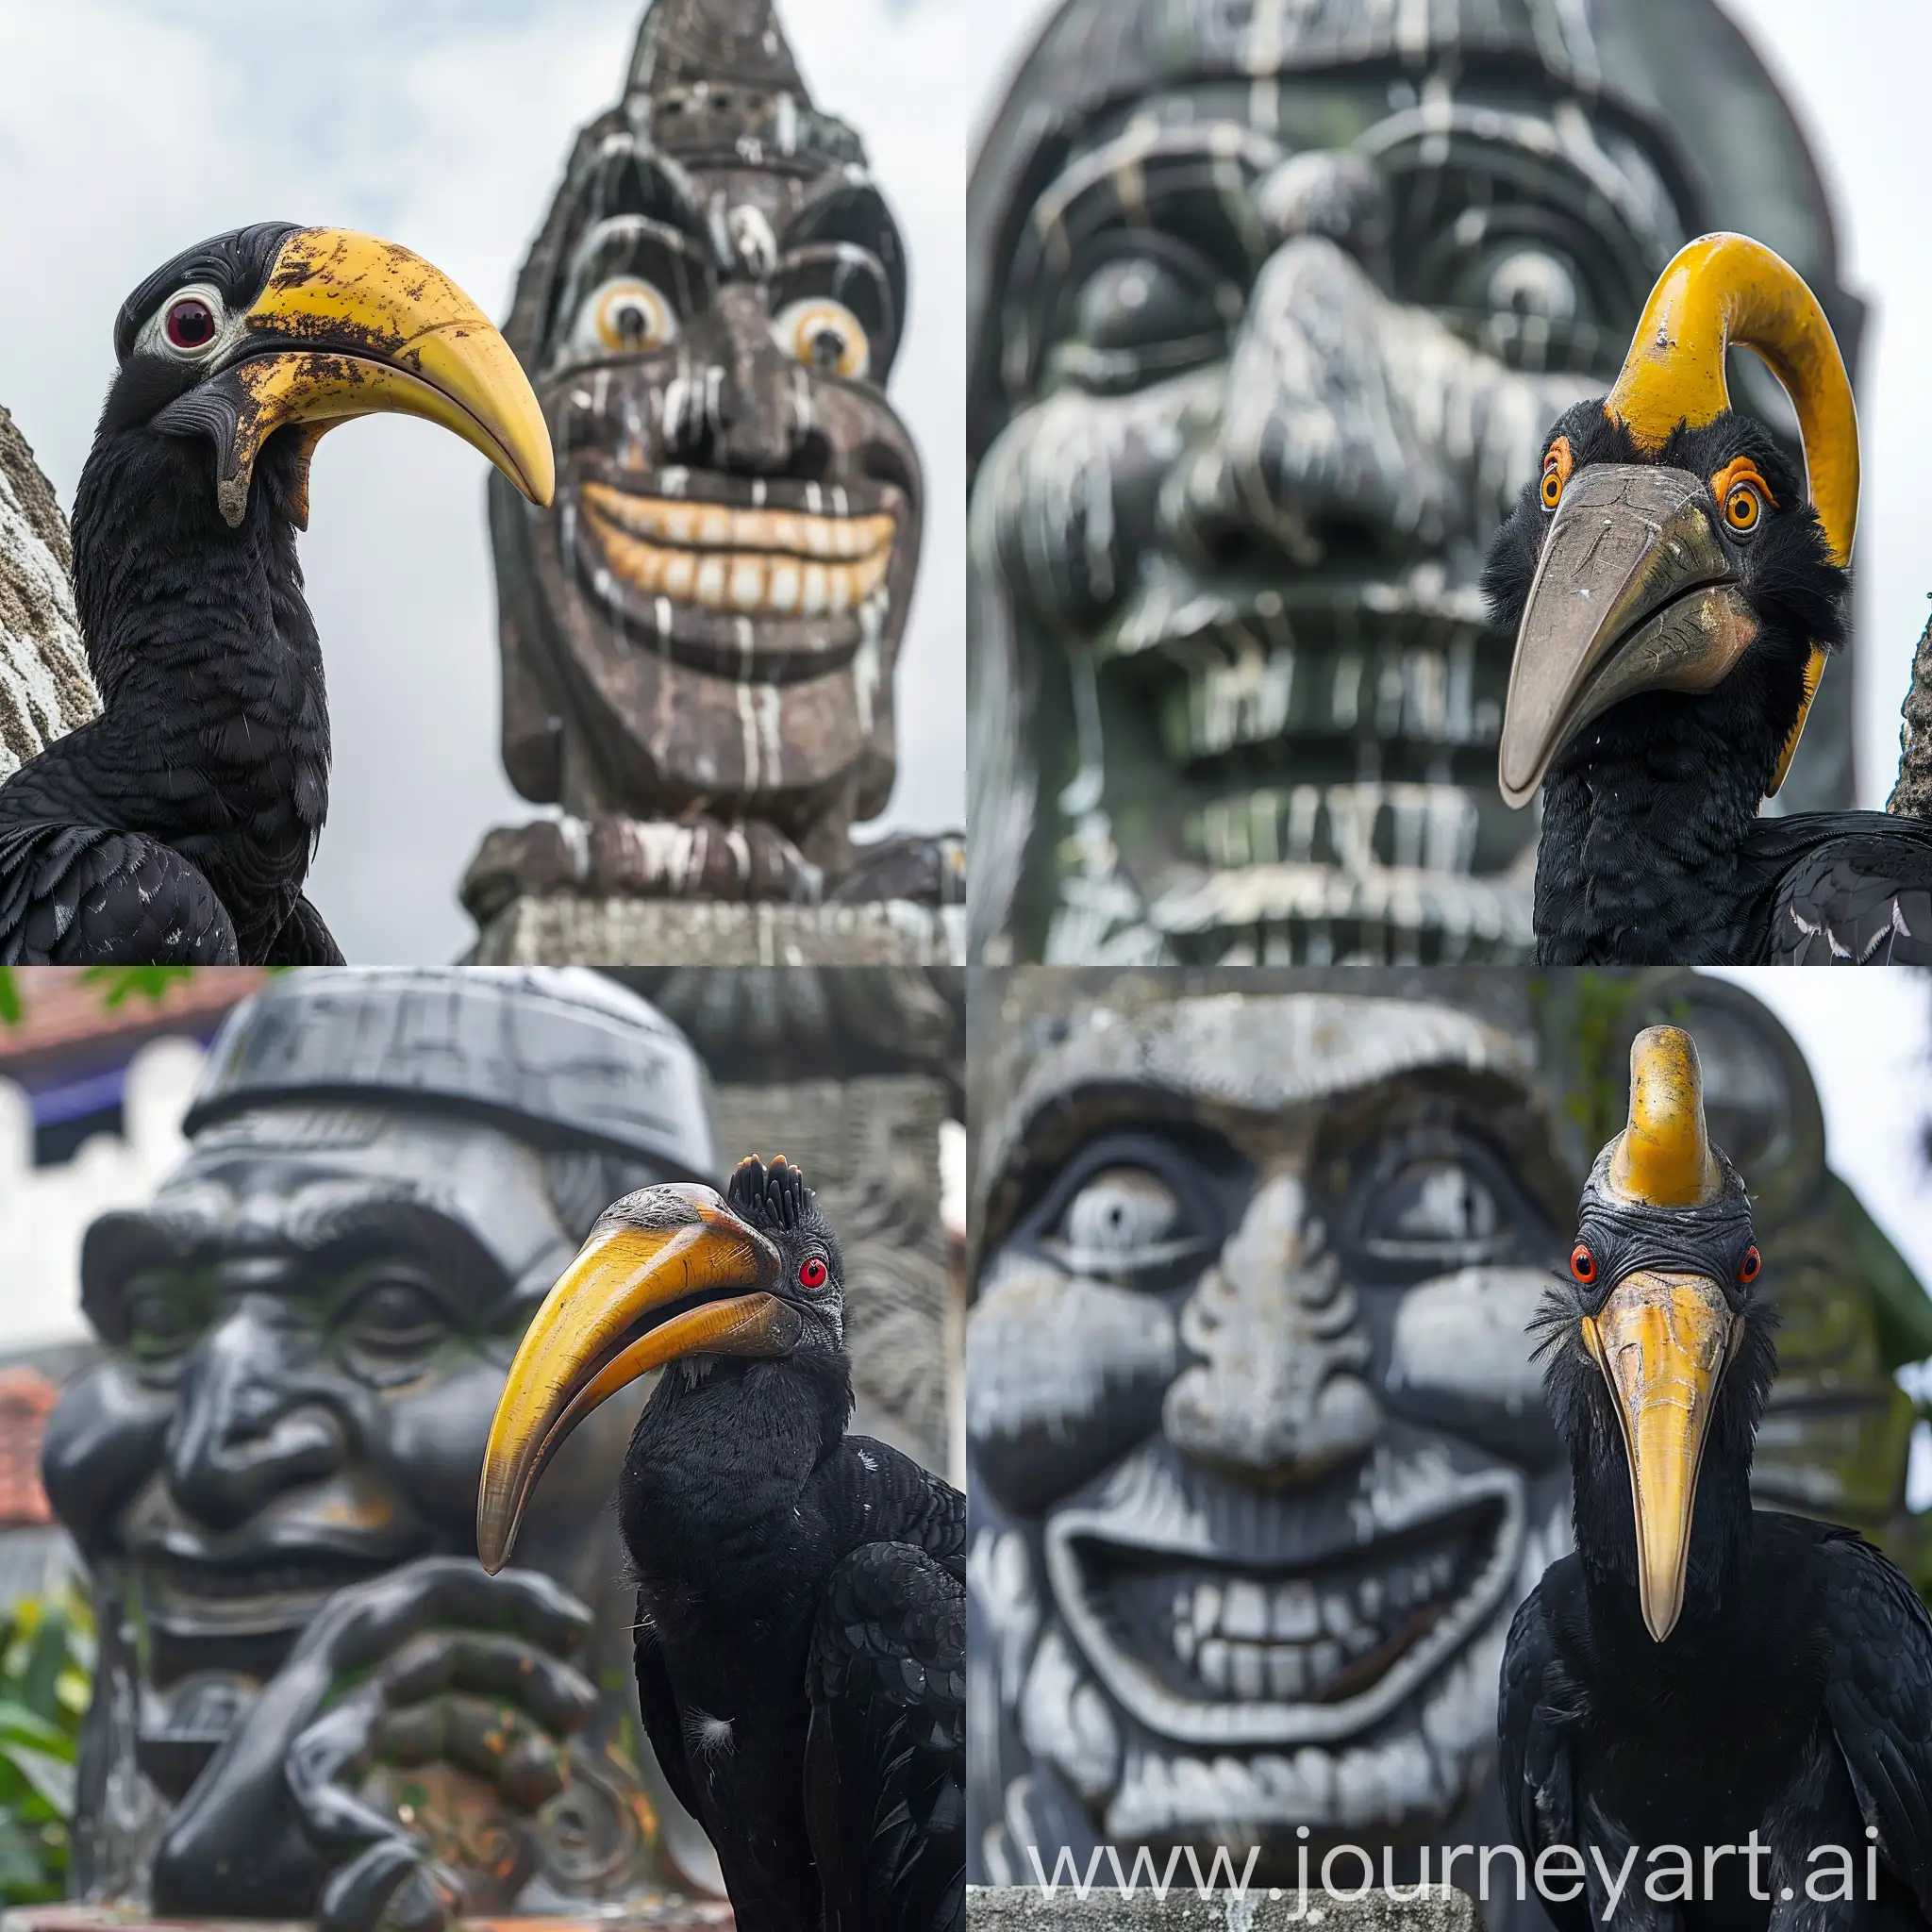 Realistics black Hornbill, yellow horn, grinned face, standing behind famous statue in pontianak city, west kalimantan indonesia